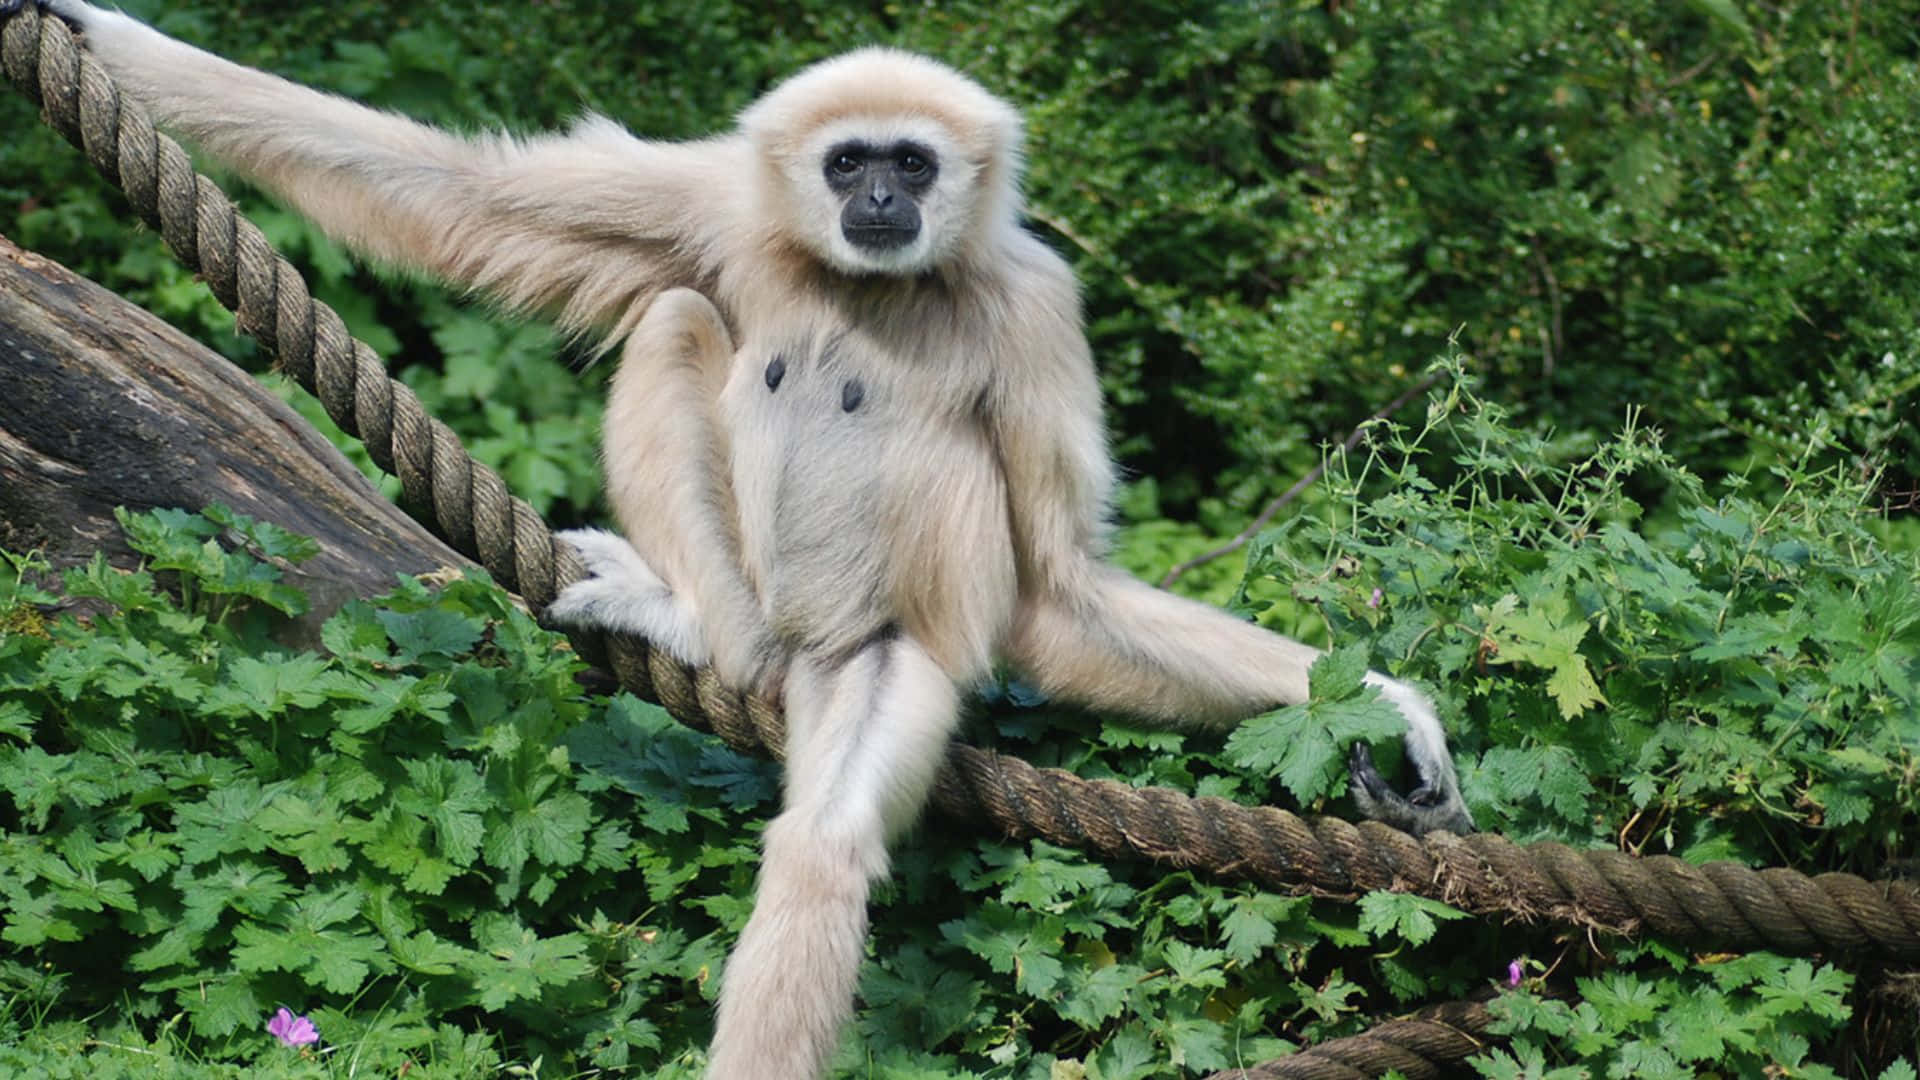 A White Monkey Is Sitting On A Rope In The Forest